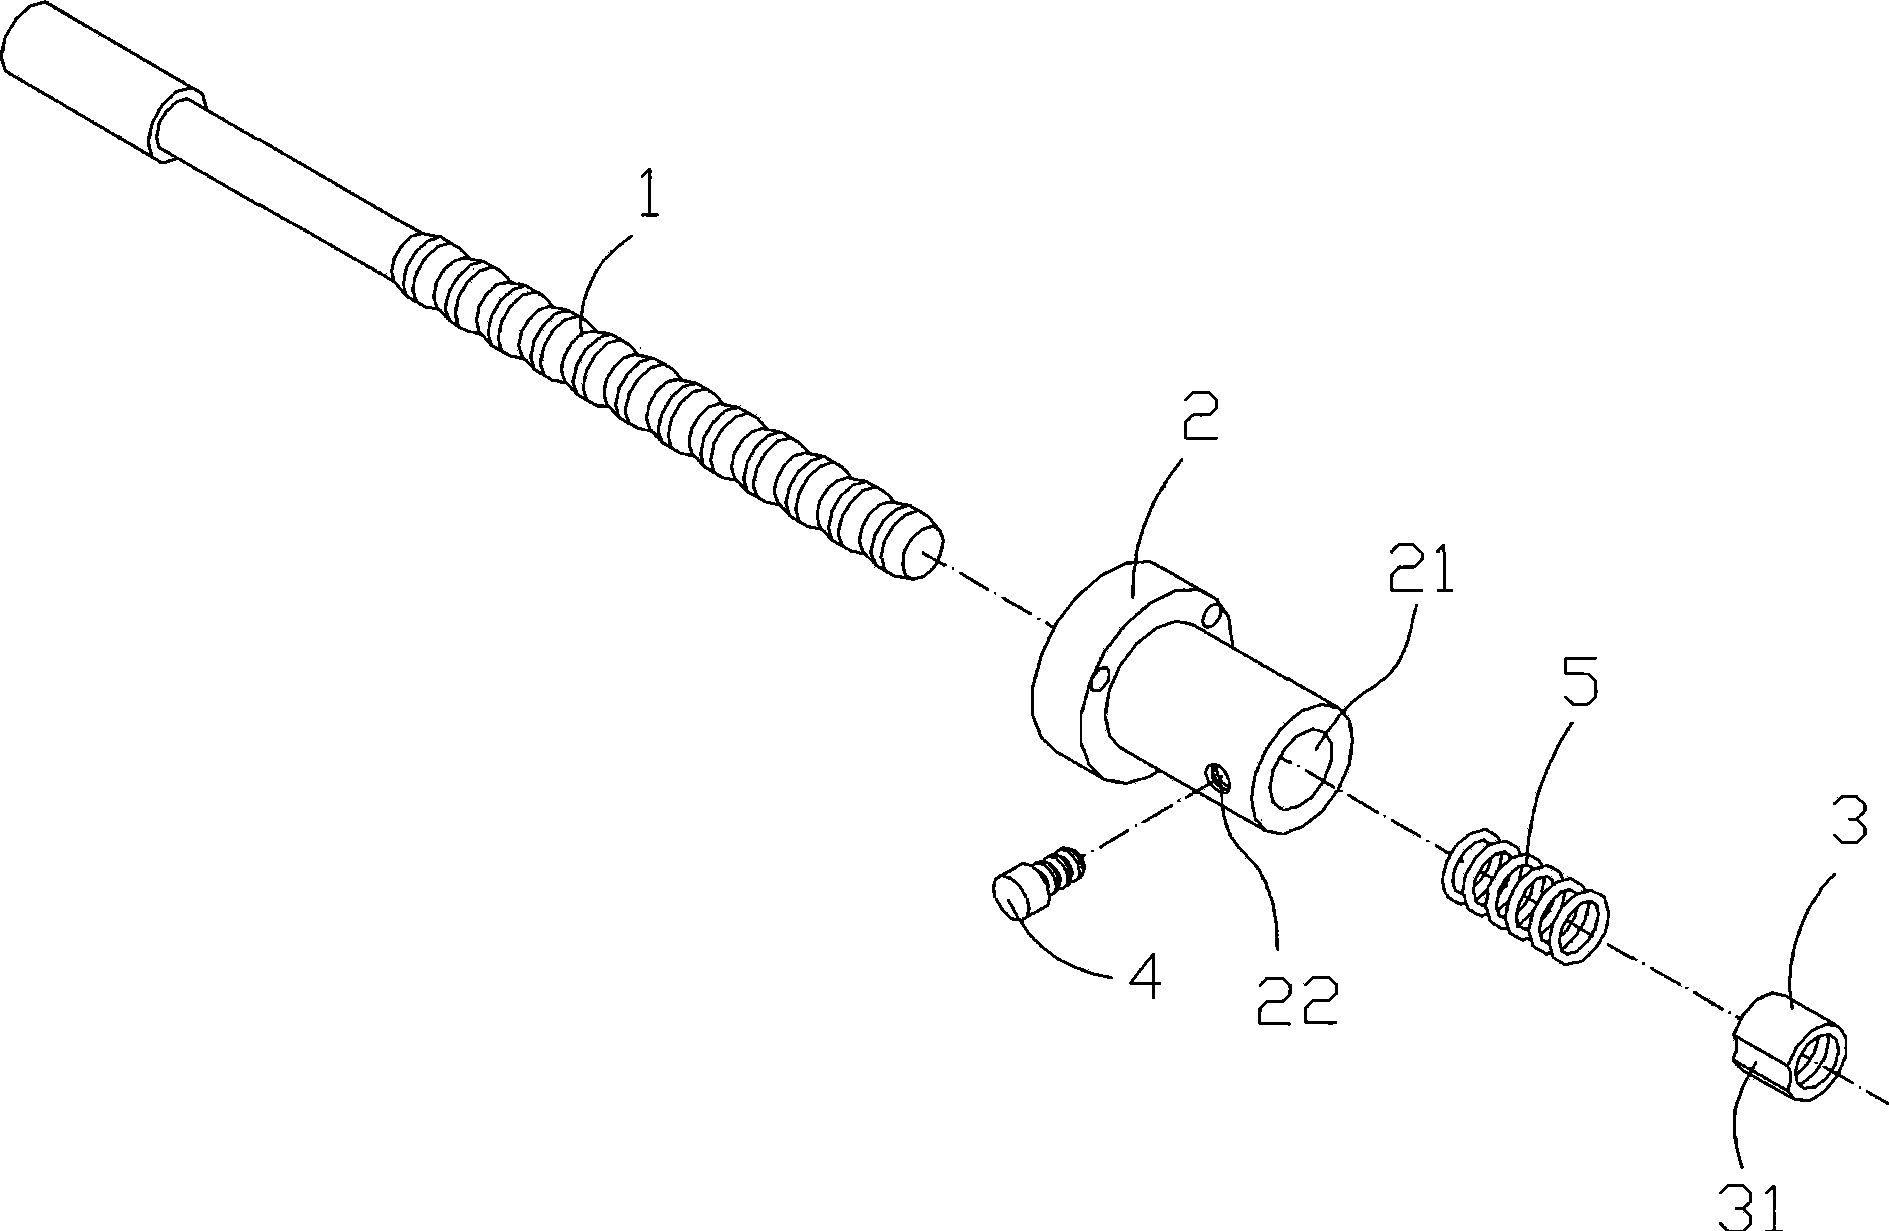 Apparatus for eliminating clearance between screw mandrel and nut